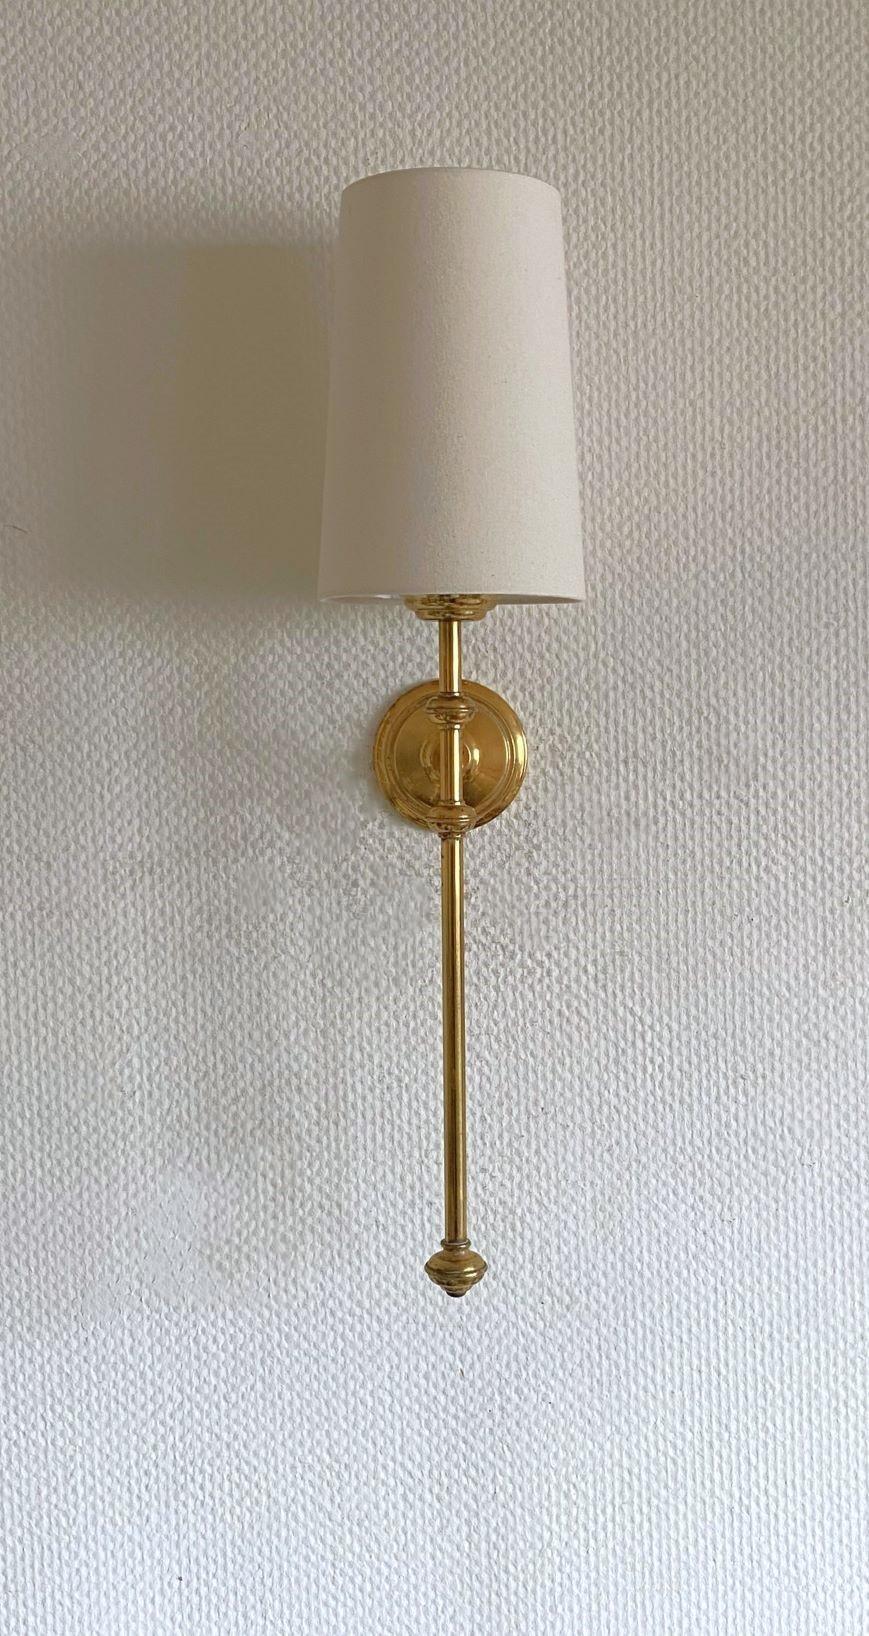 A tall Art Deco torchiere wall sconce in the style of Maison Jansen, France, 1955-1959. Very elegant design made of brass with conical off-white linen shade. It takes one Edison E14 candelabra screw bulb up to 60watt.
In very good vintage condition,